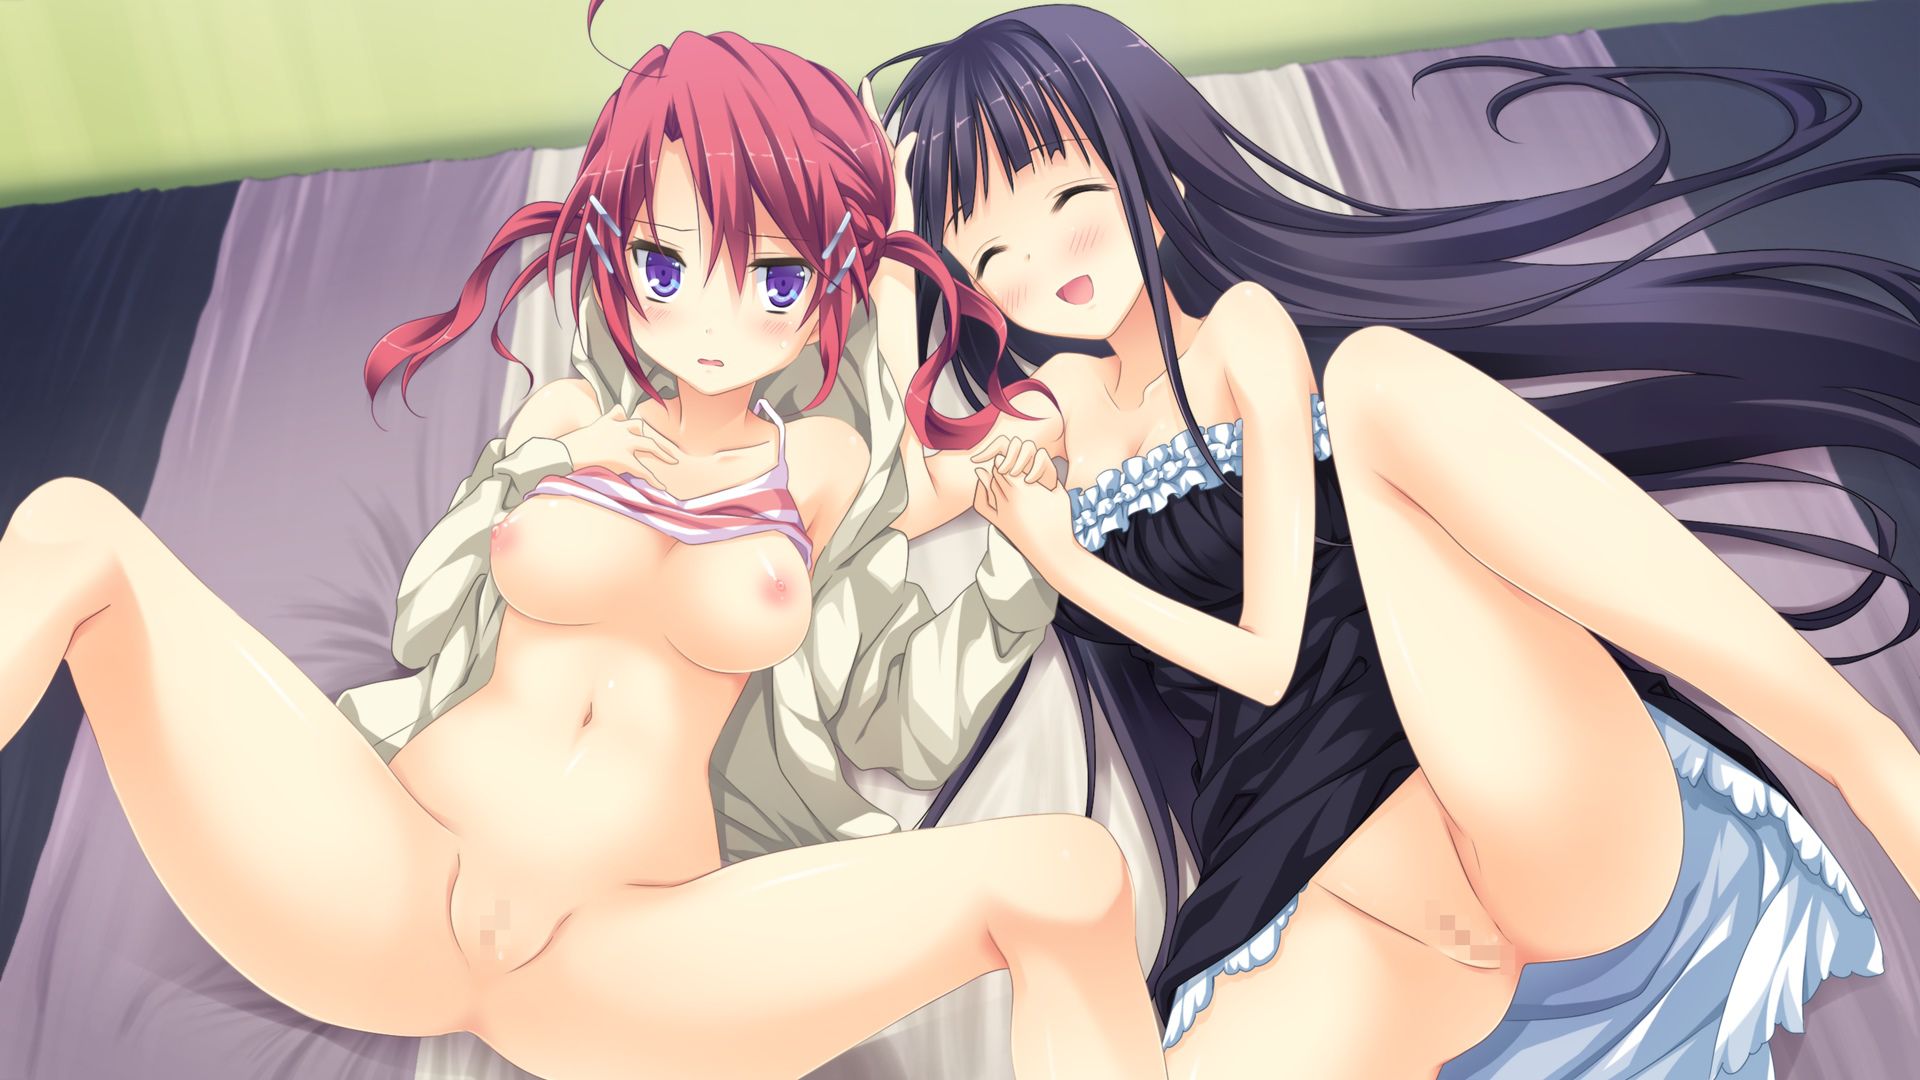 And me and her lover. [Under age 18 prohibited eroge CG] picture part 2 14